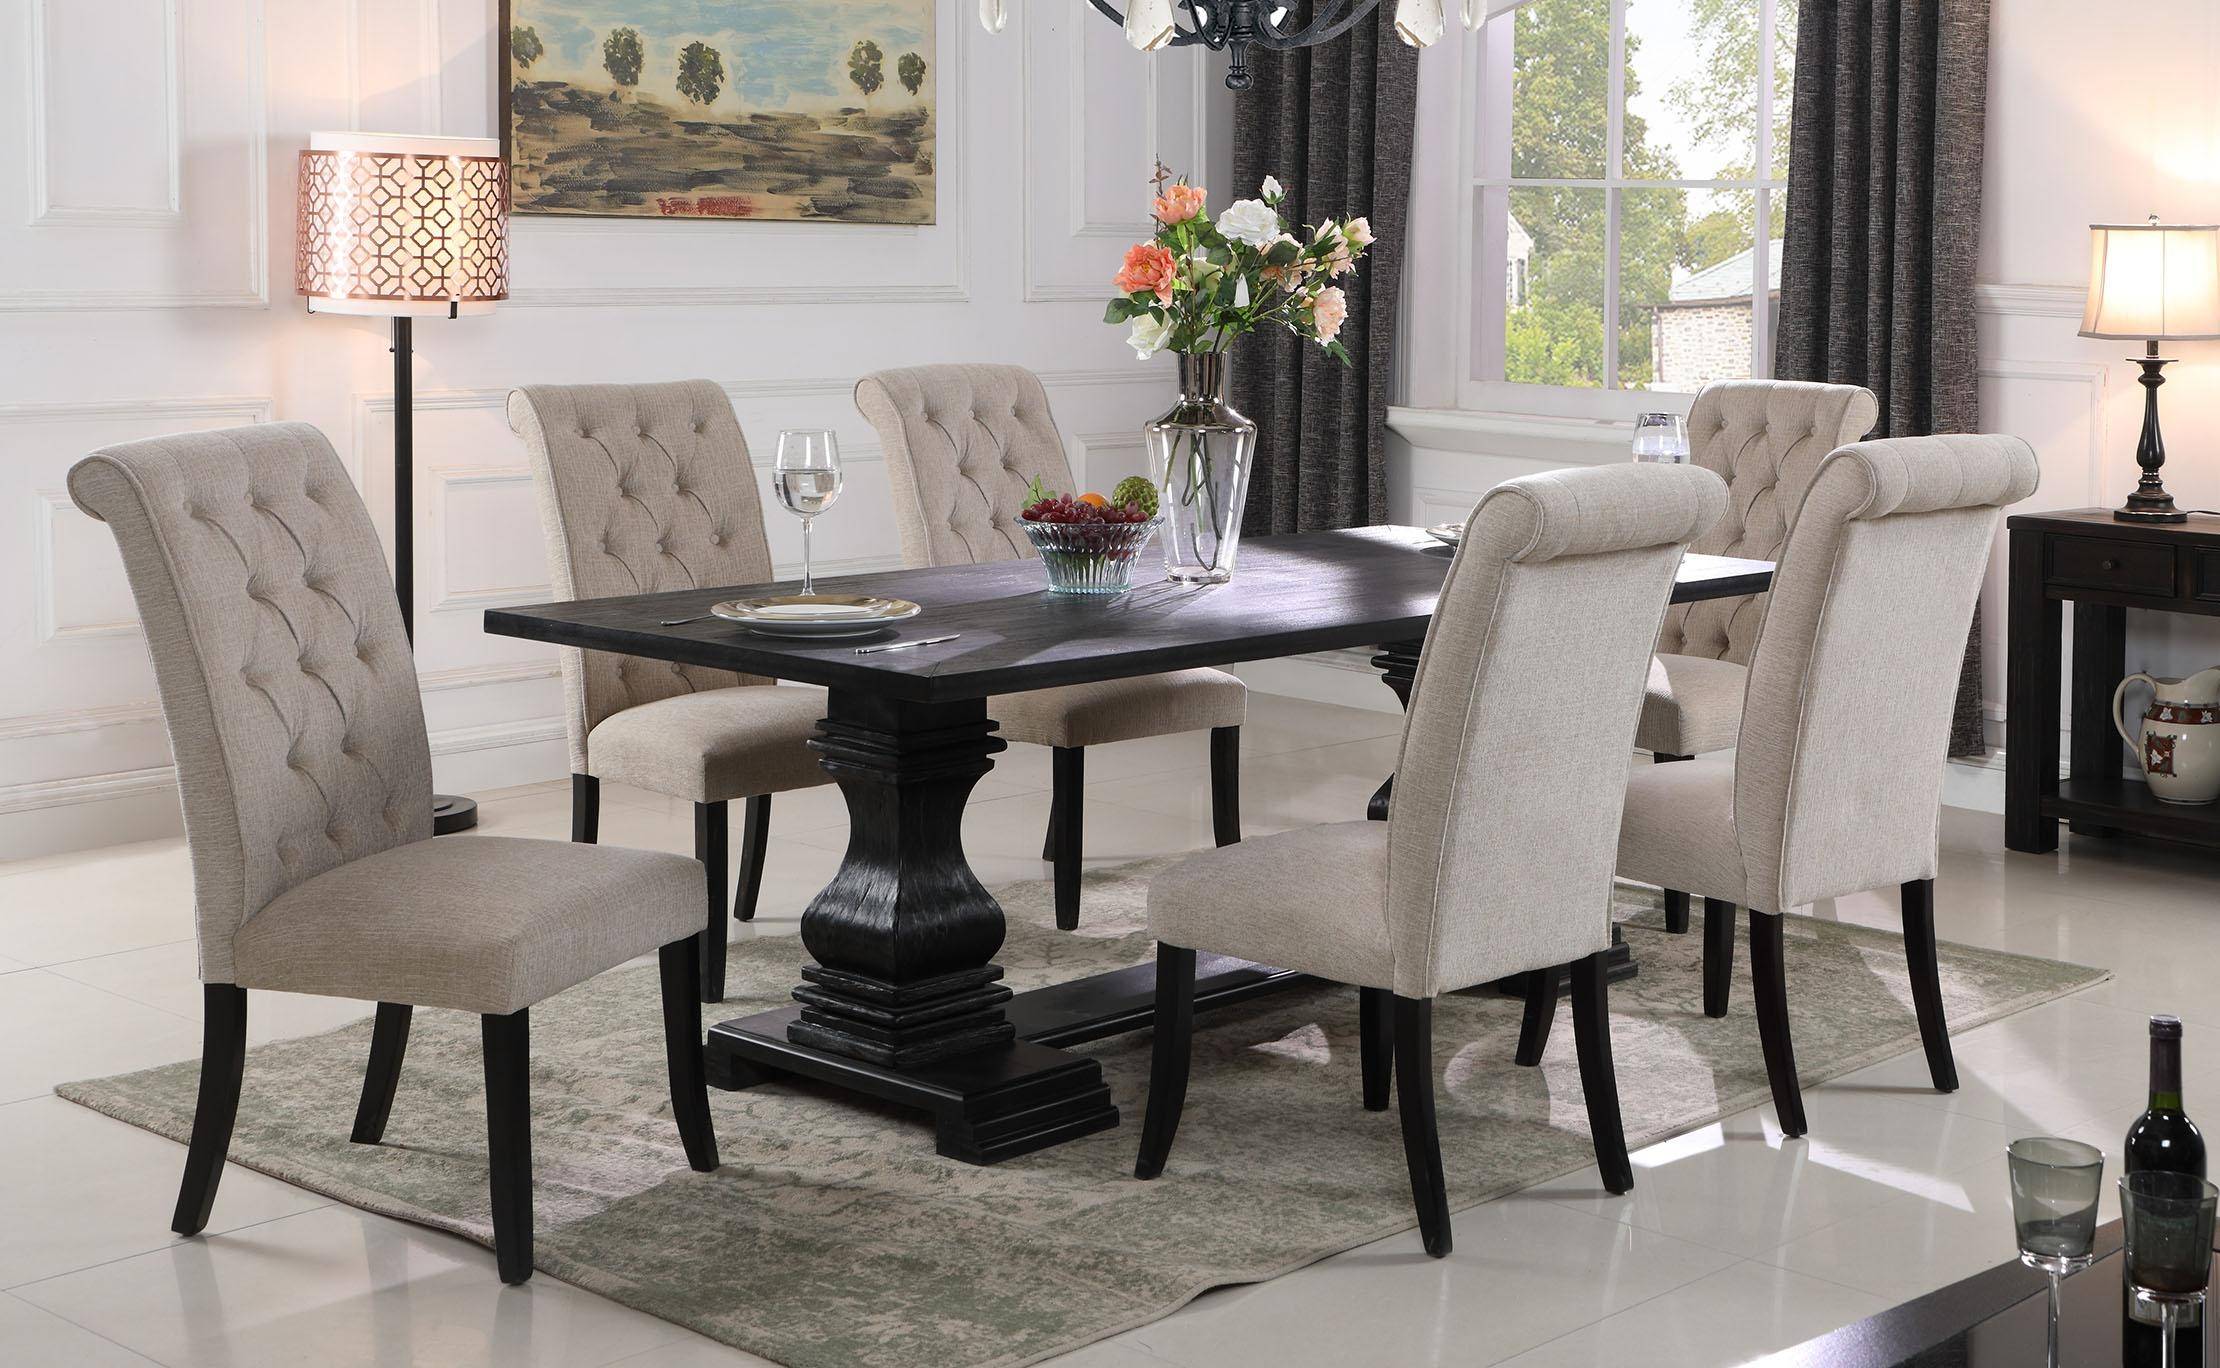 Dining Room Table With Fabric Chairs, Dining Table With Fabric Chairs